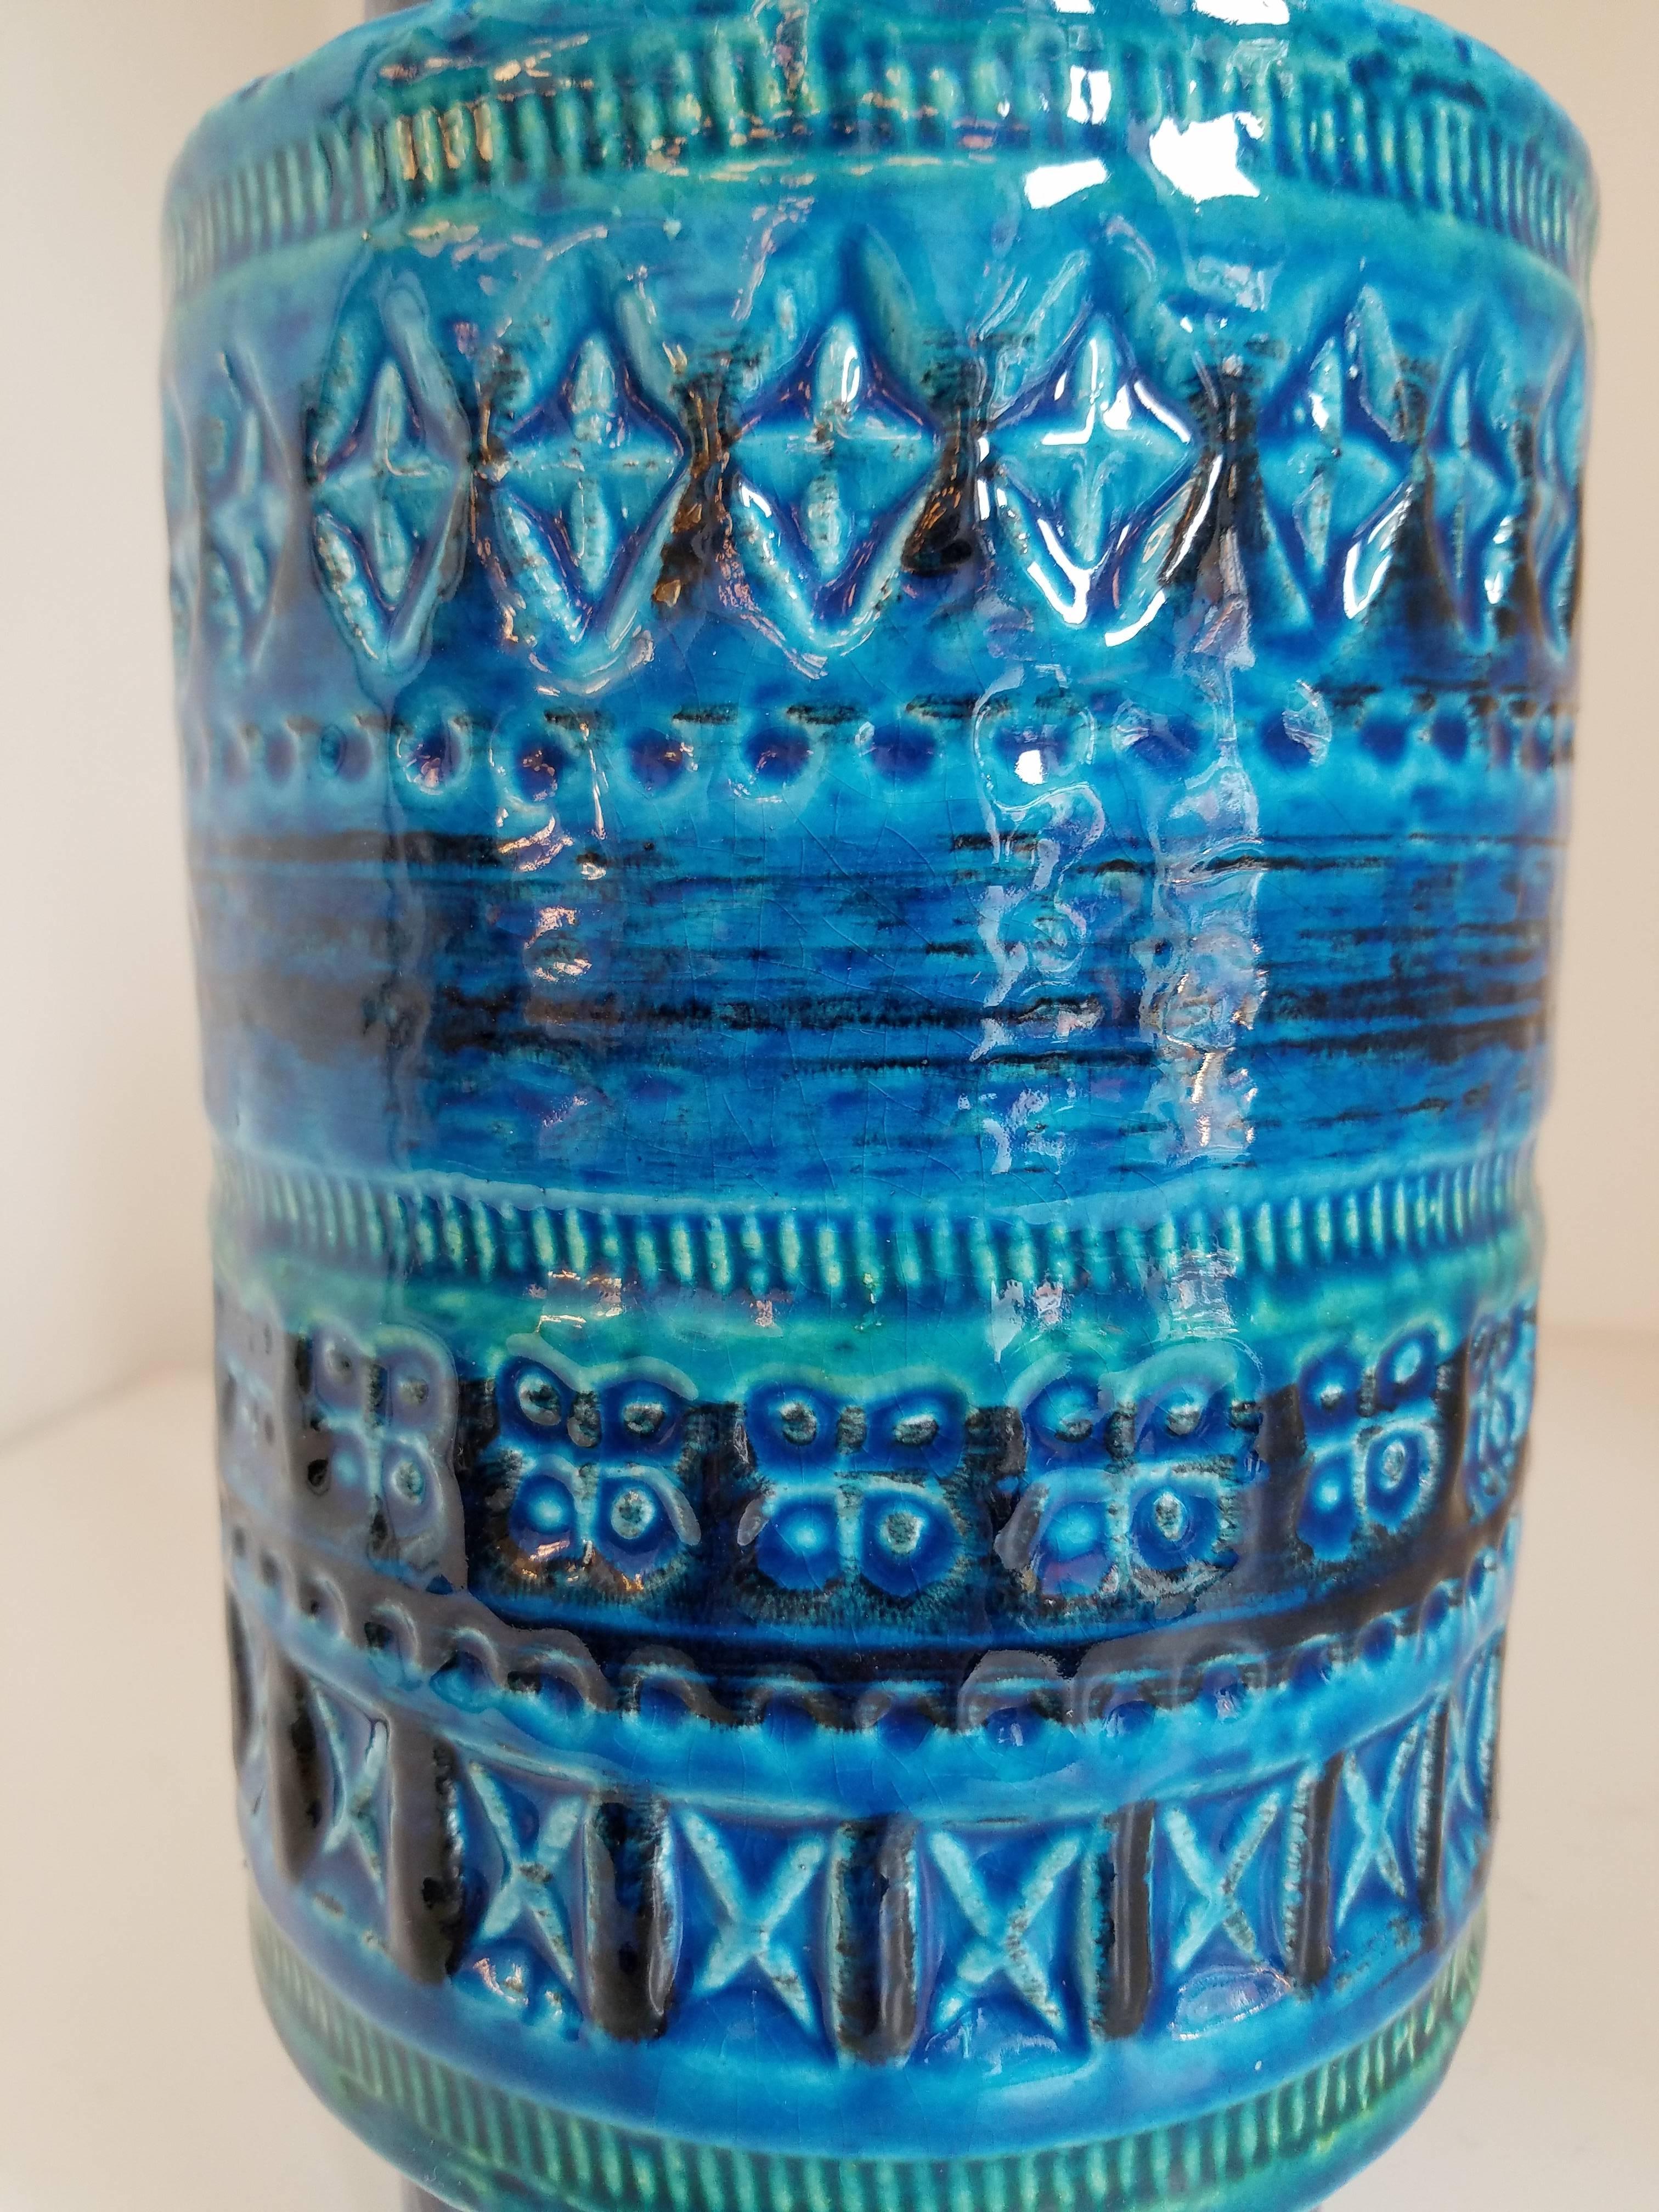 Rimini blue, blue glazed ceramic by Aldo Londi for Bitossi with hand-carved geometric designs features vibrant turquoise and cobalt glaze. Made in Italy, circa 1960

Measure: Diameter of vase is 5